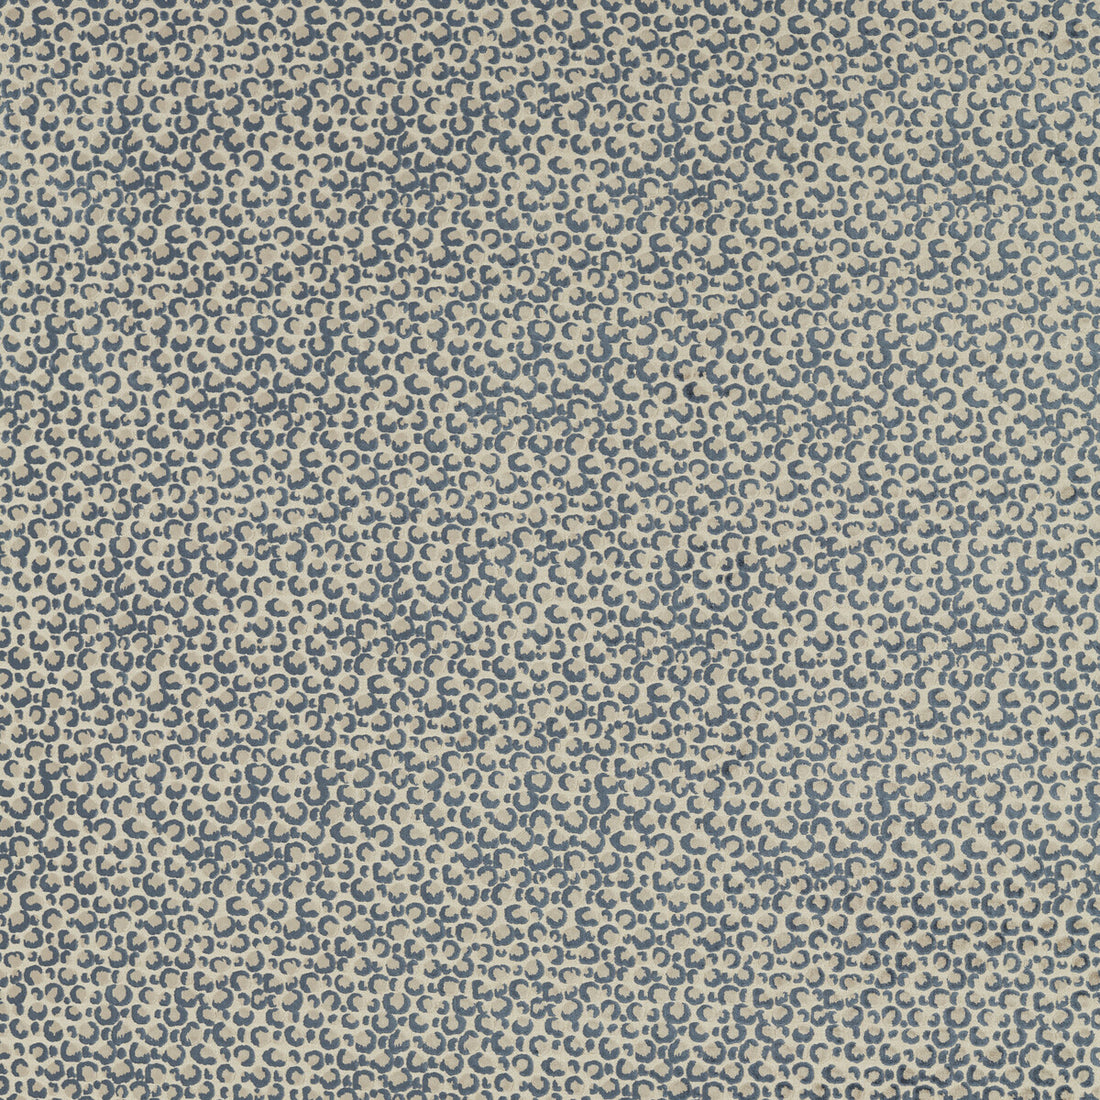 Pokot fabric in denim color - pattern F1714/02.CAC.0 - by Clarke And Clarke in the Breegan Jane Fabrics collection